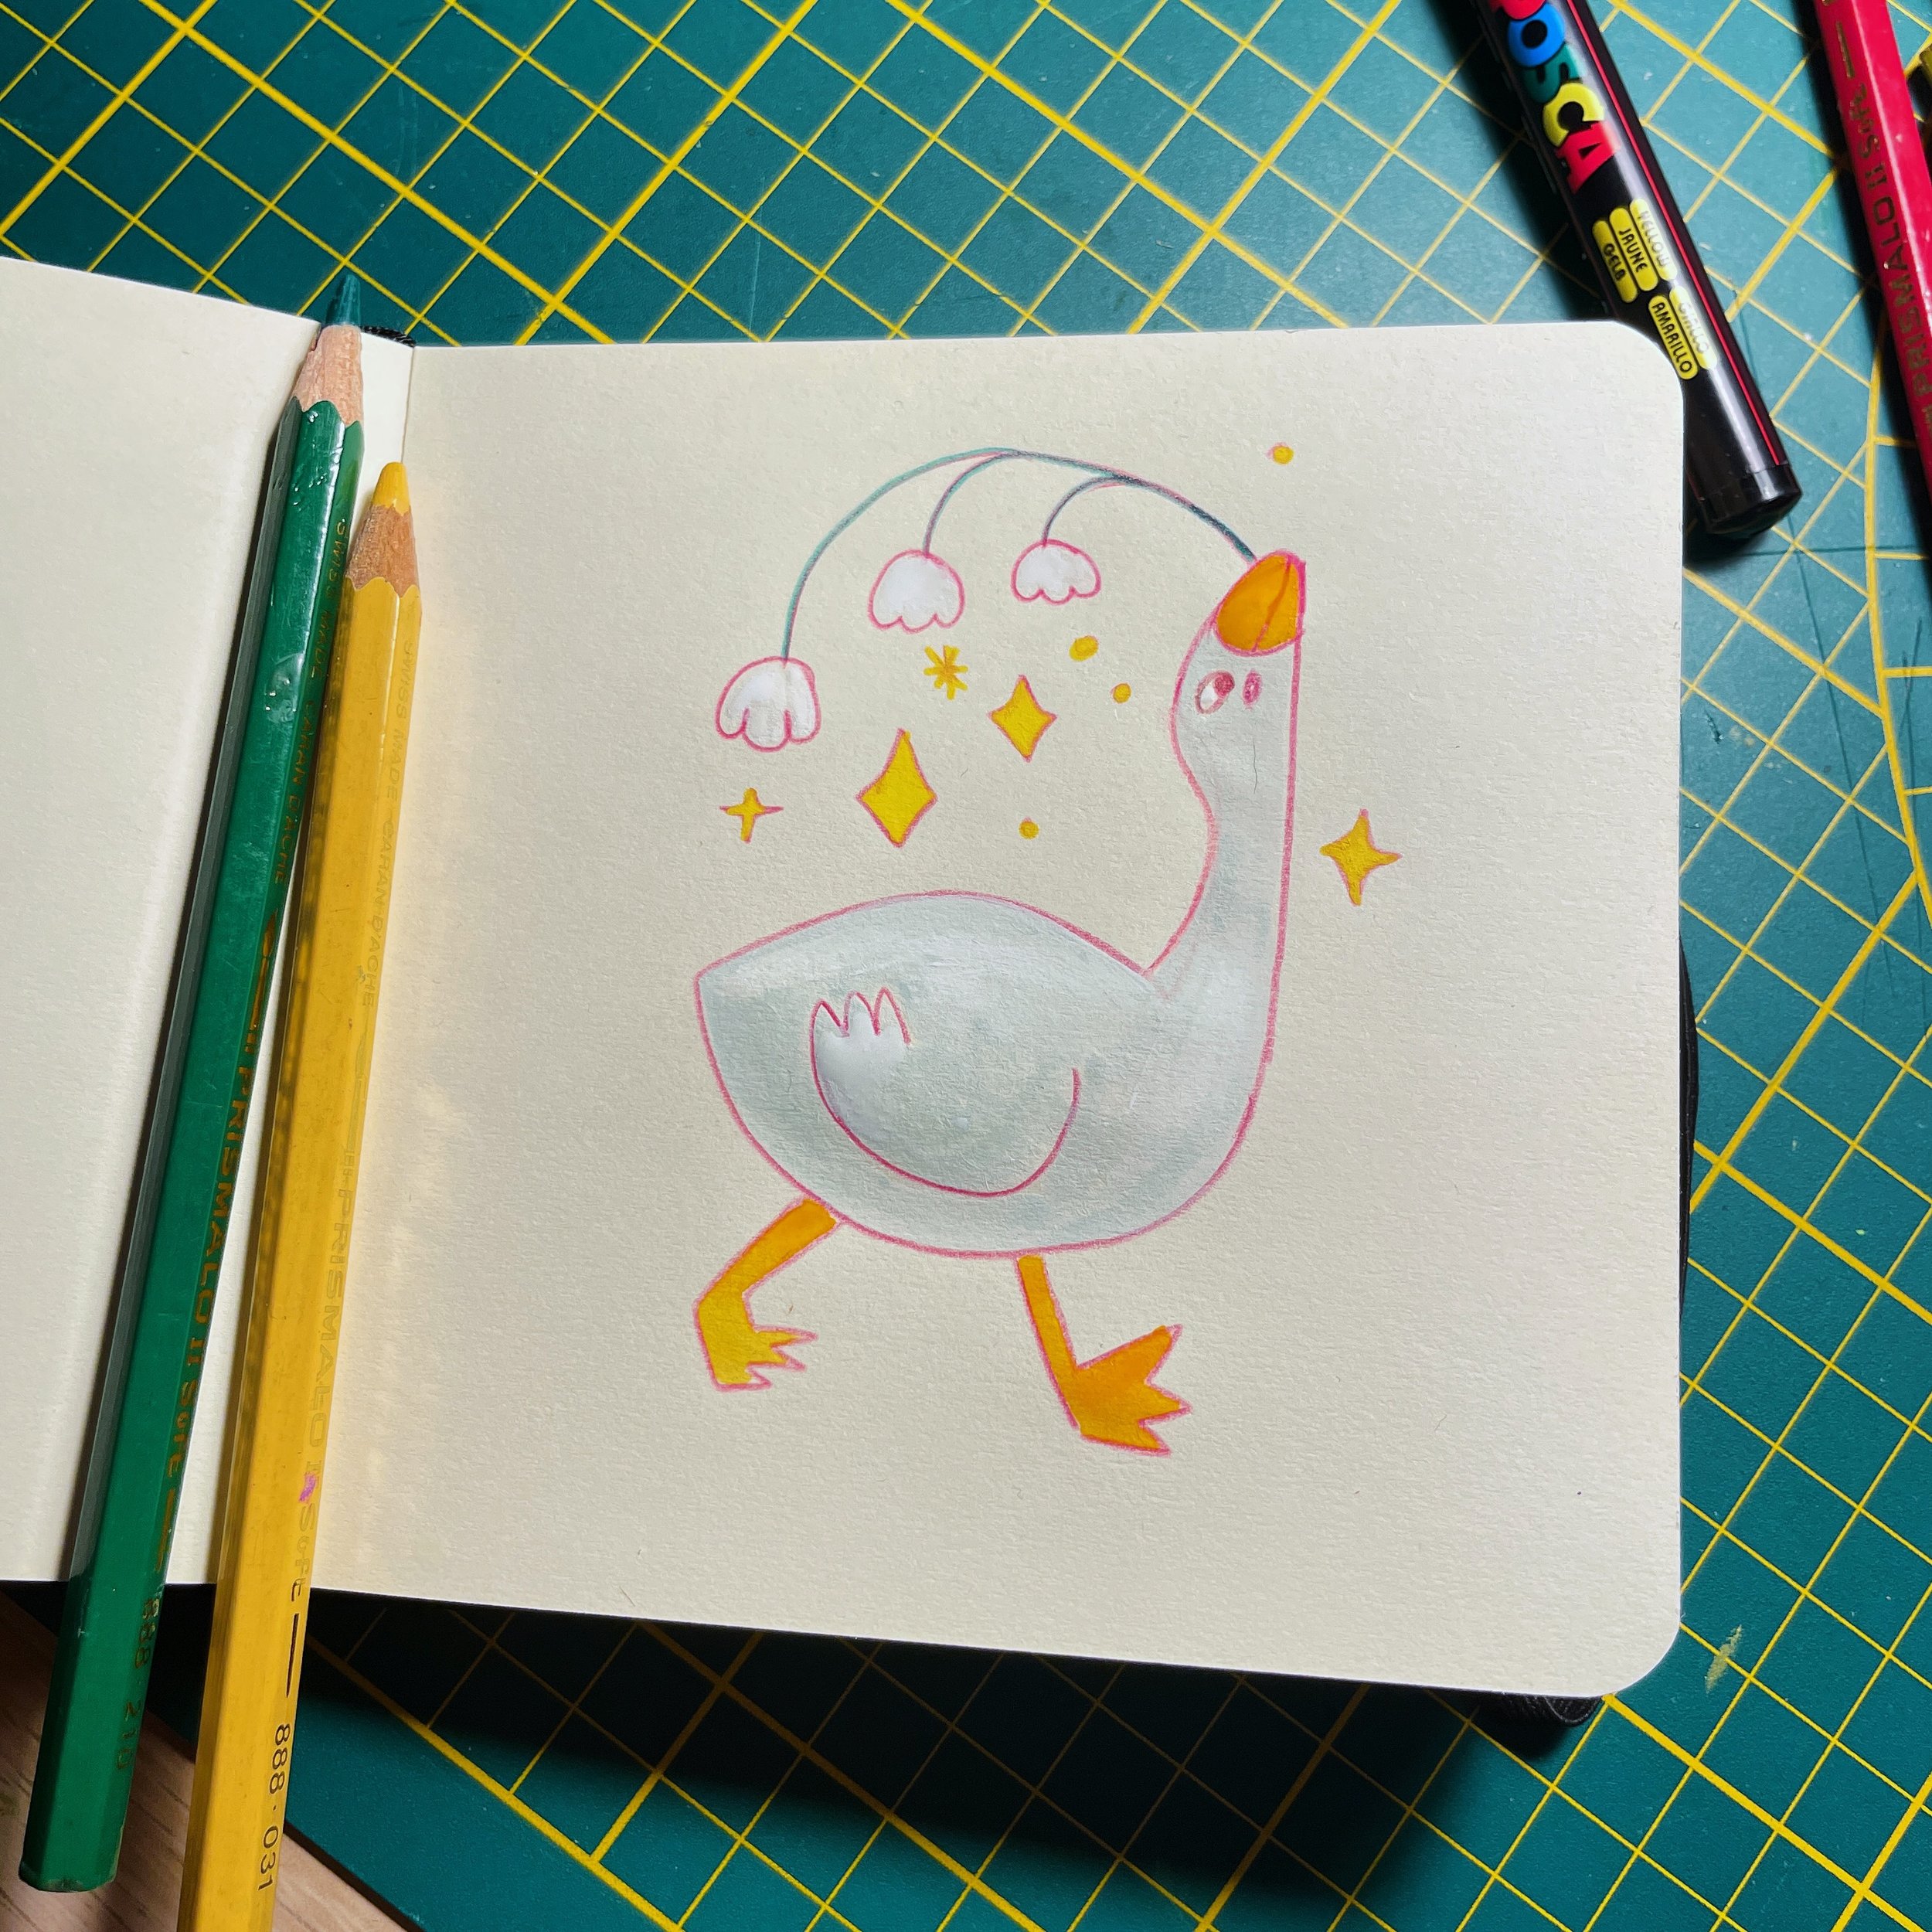 I hope your day was fabulous, just like this goose 🪿 ✨ ☀️ 

#illustration #cuteanimals#drawing #gouache #sketchbook #doodles